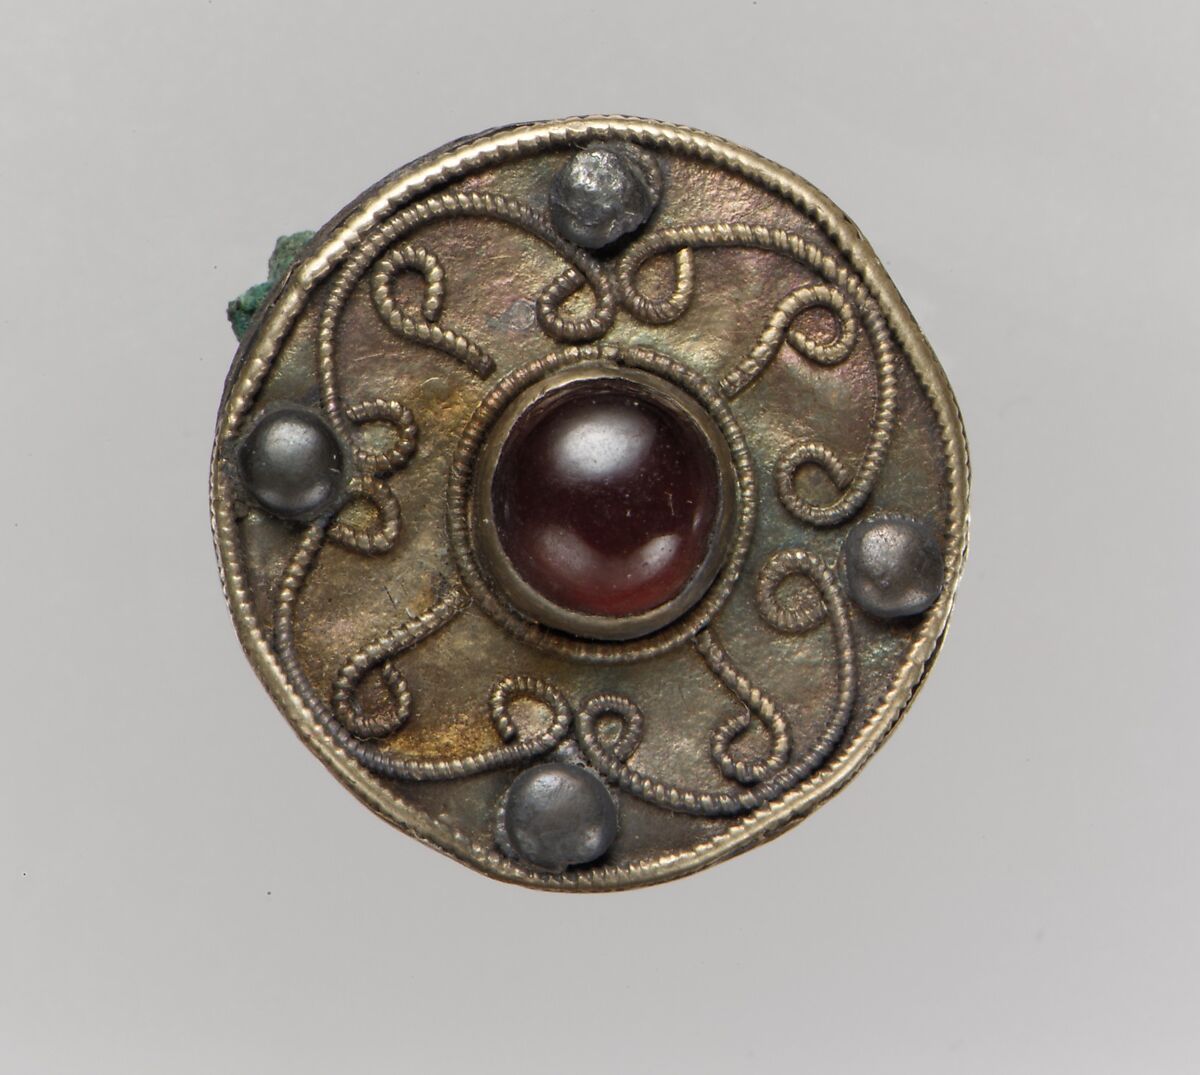 Disk Brooch, Gold, silver core, nails, paste cabochon, gold wire, copper alloy pin, Frankish 